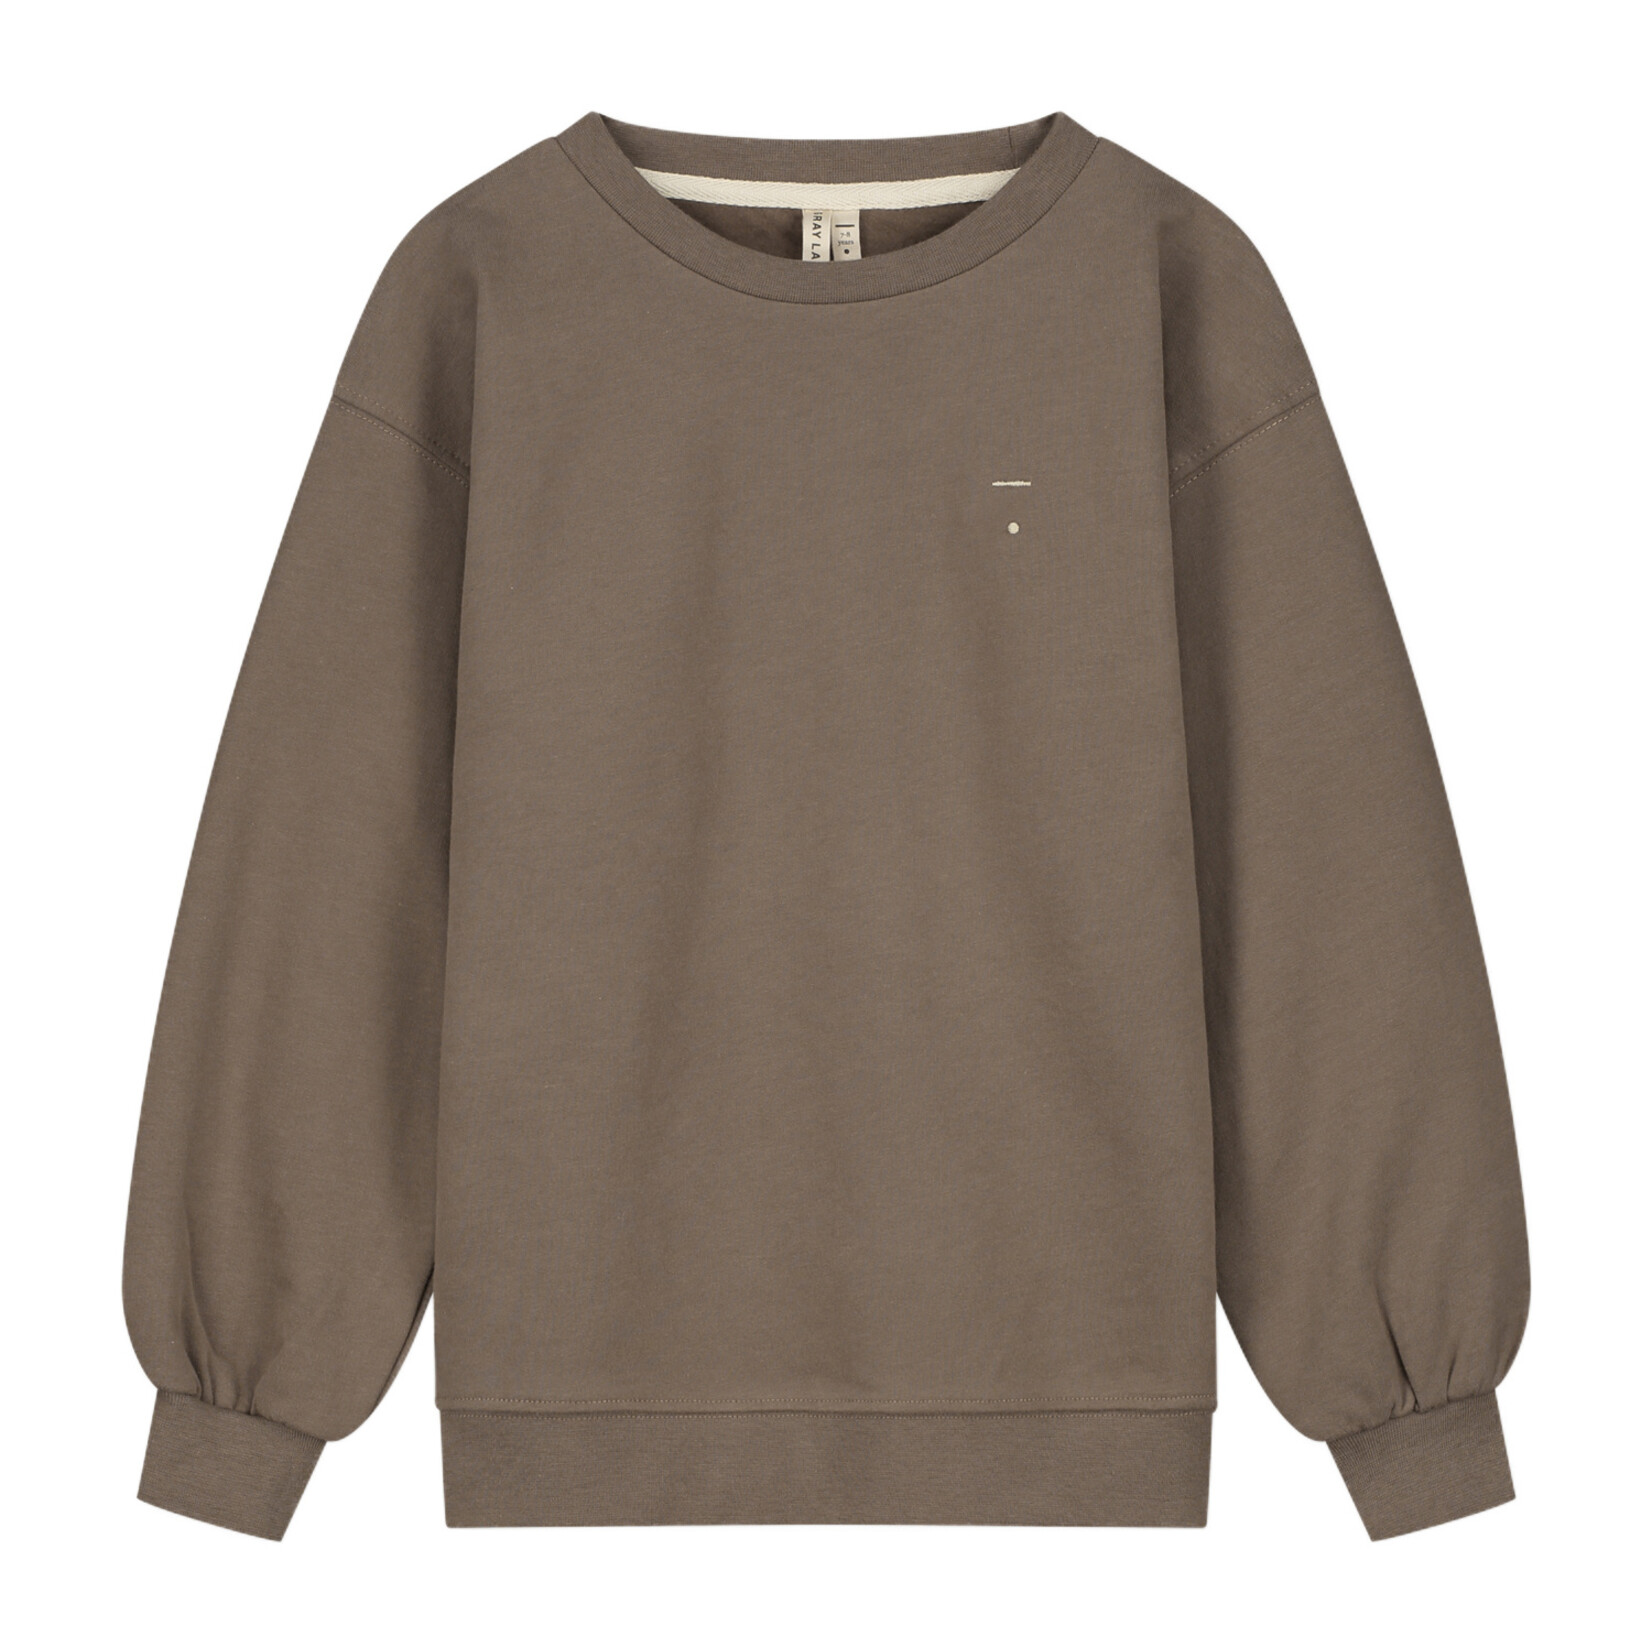 Gray Label Dropped Shoulder Sweater - Brownie